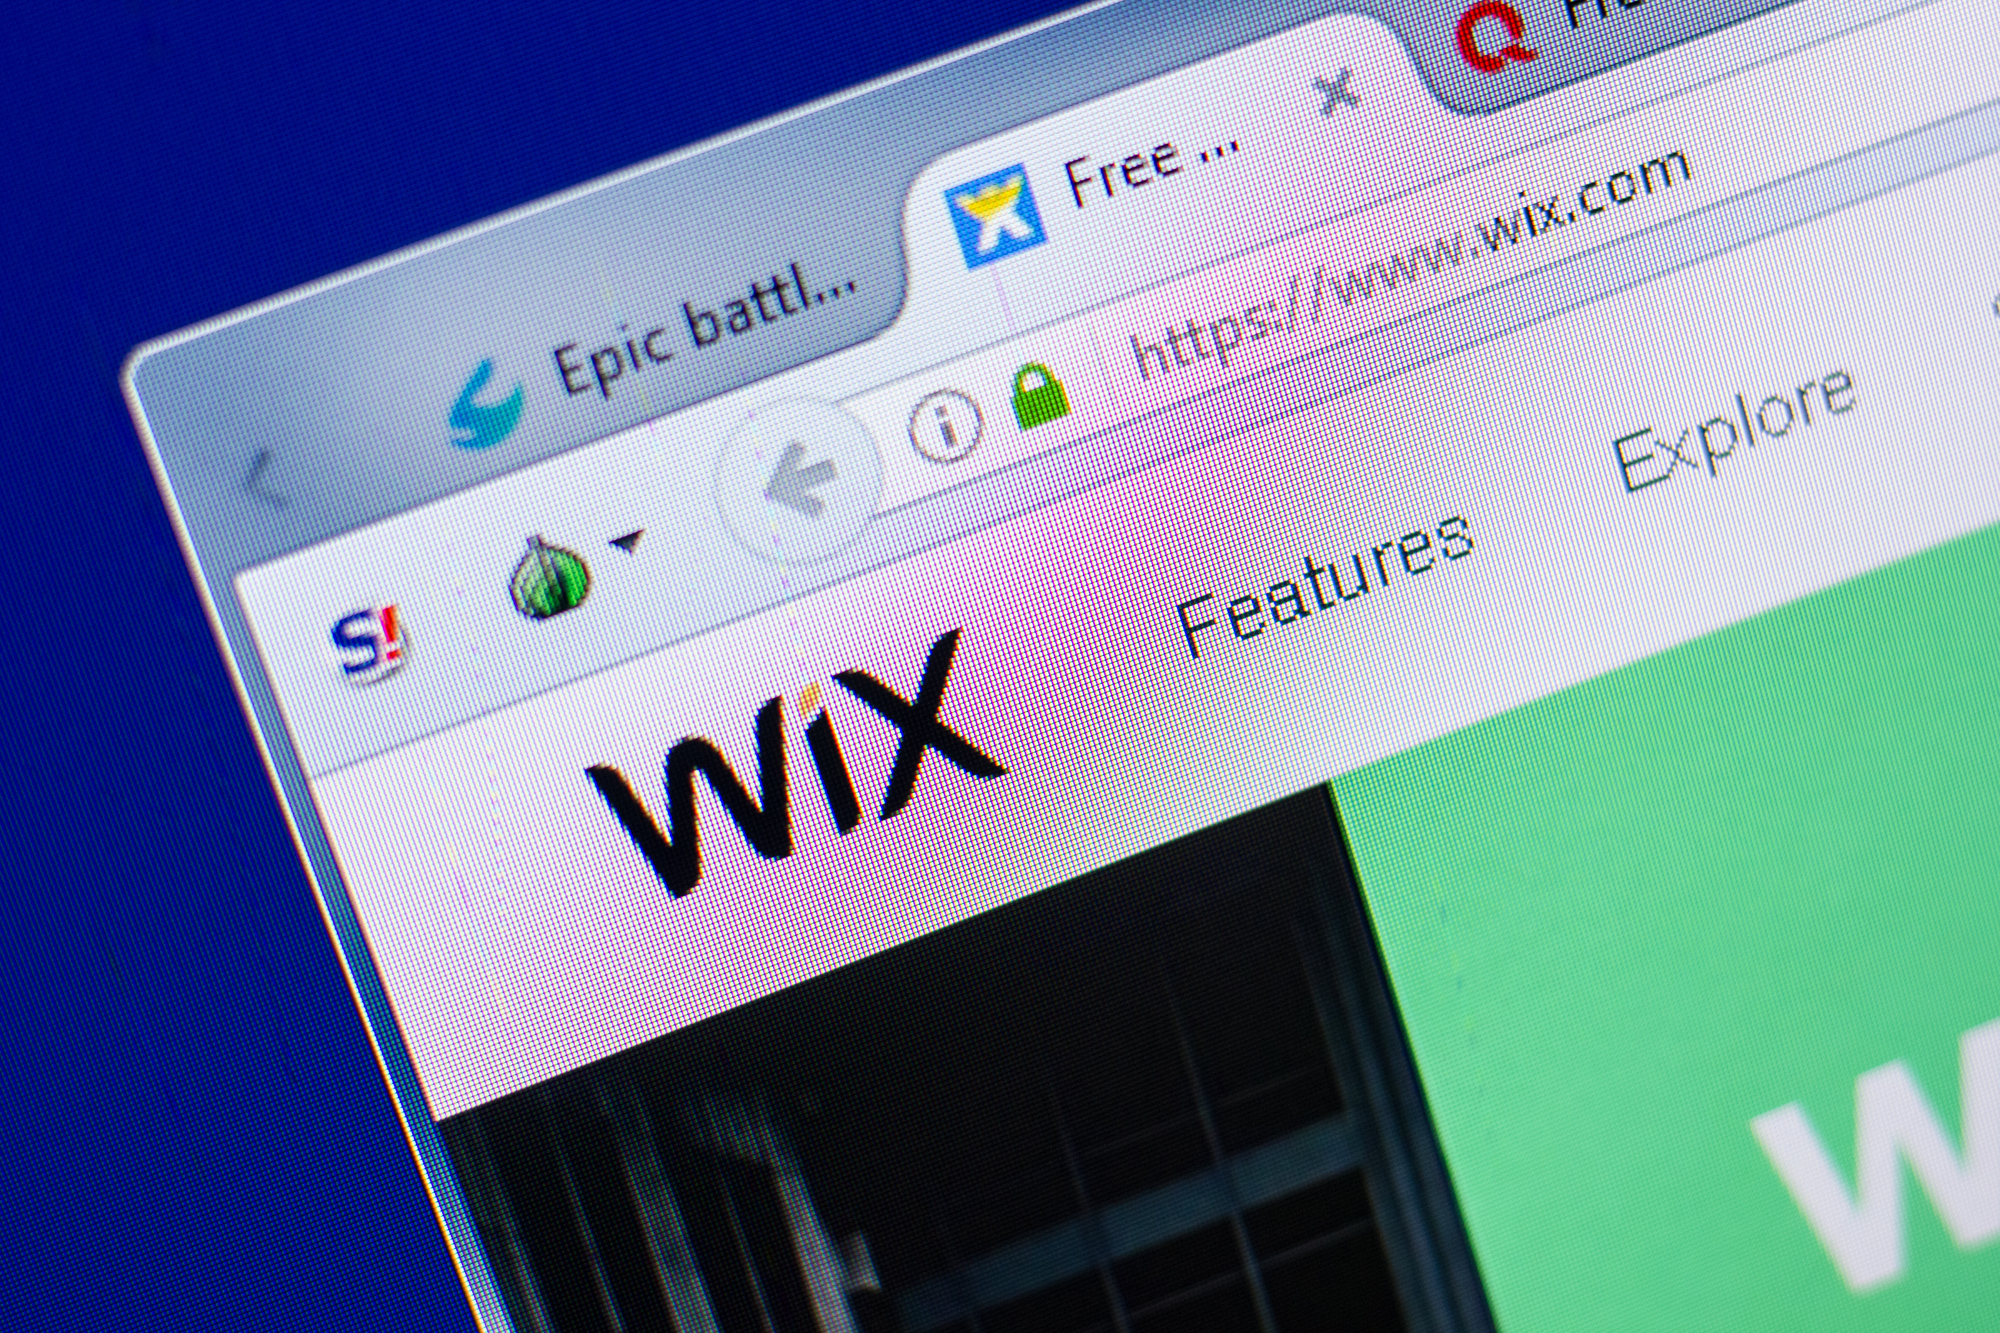 Wix Vs Squarespace: Which Is The Better Website Builder?